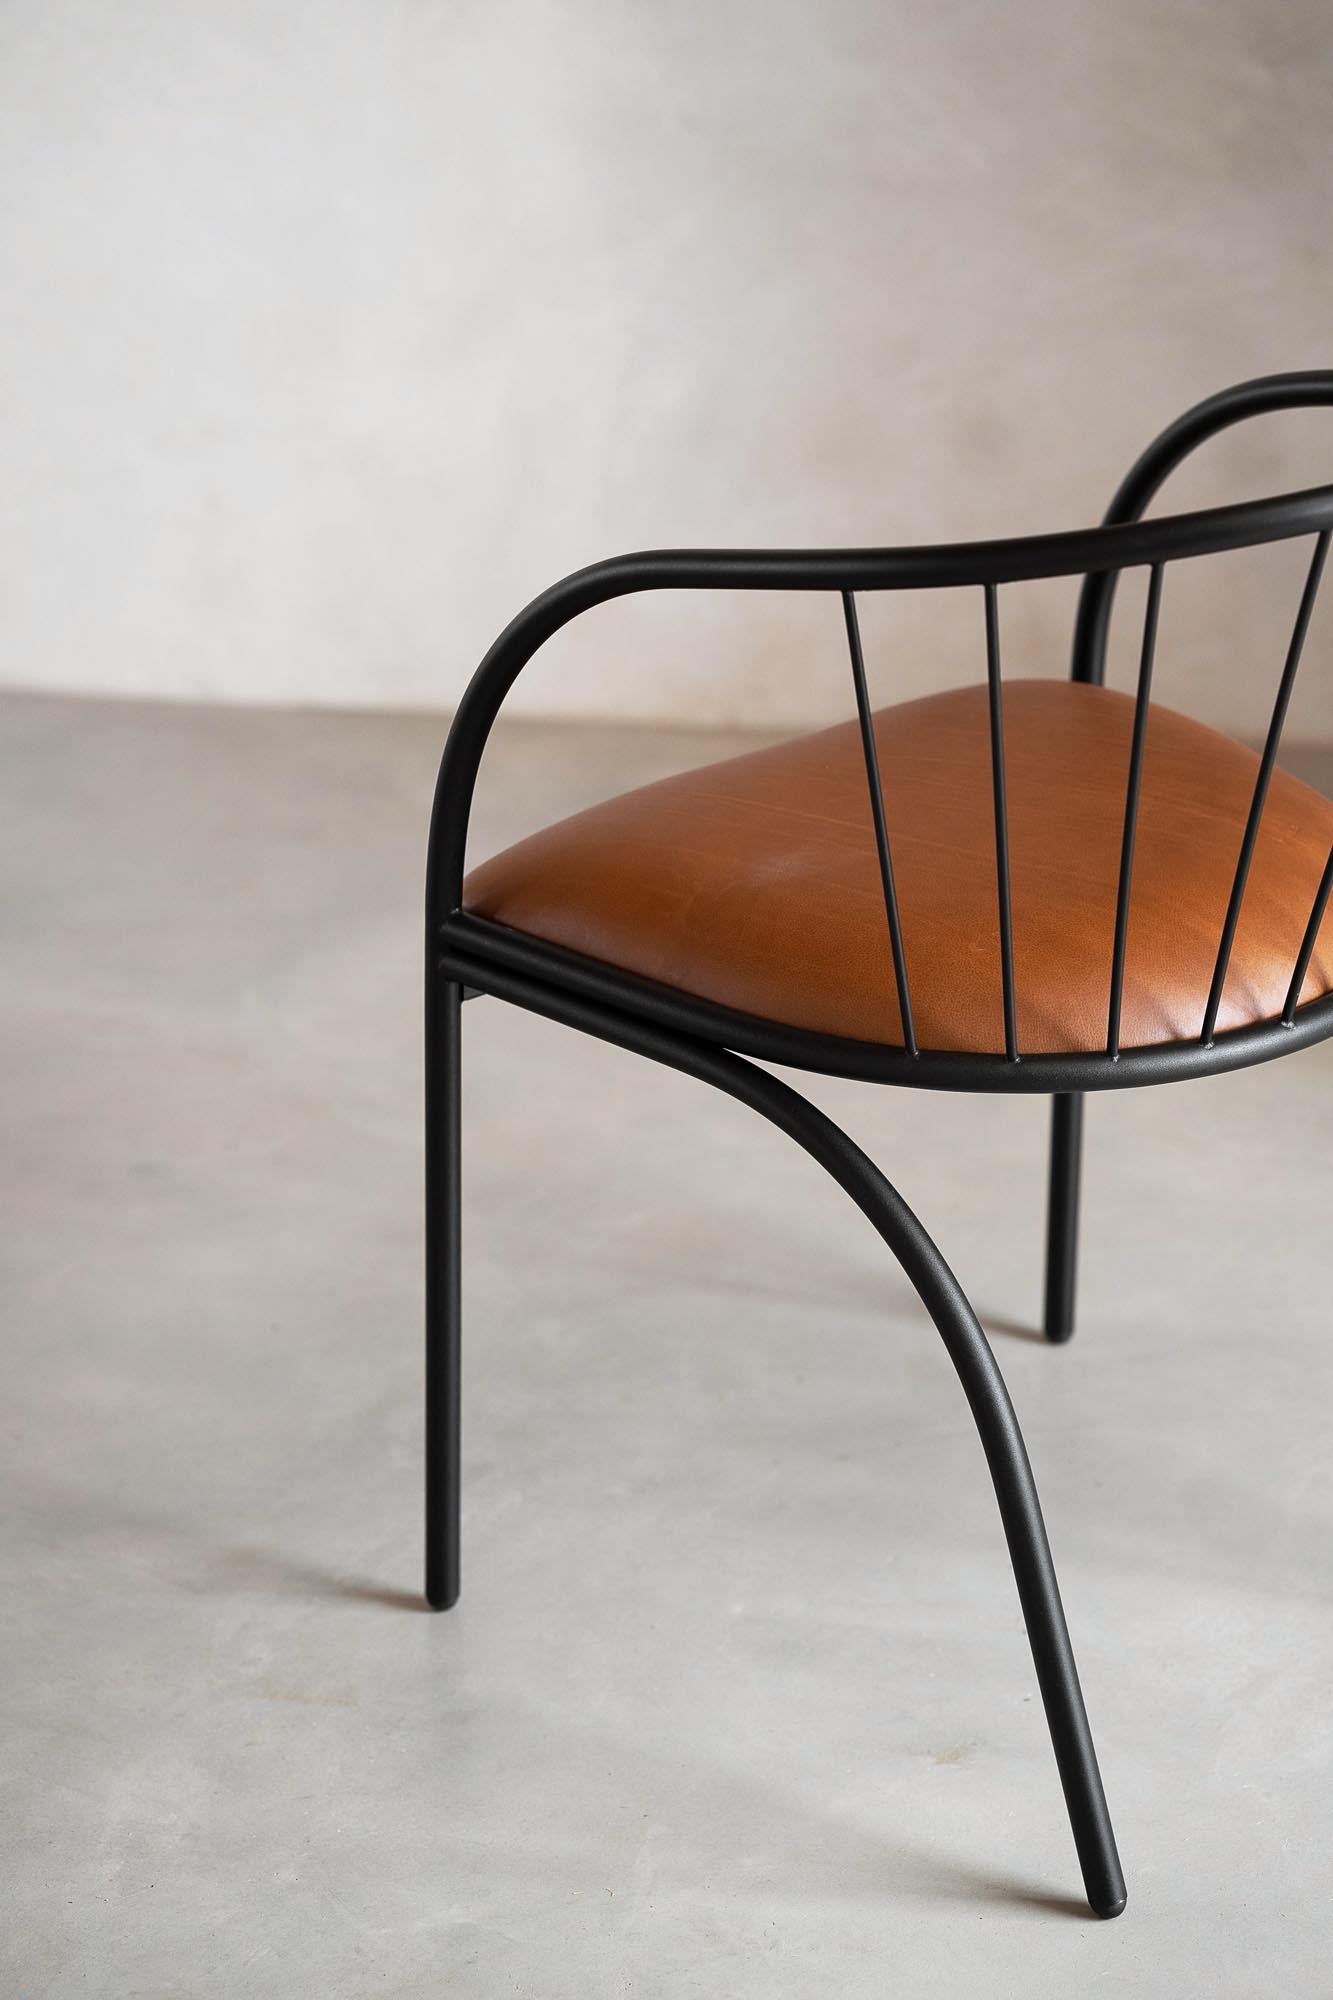 Fluted Occasional Chair with Leather Seat - Pedersen + Lennard